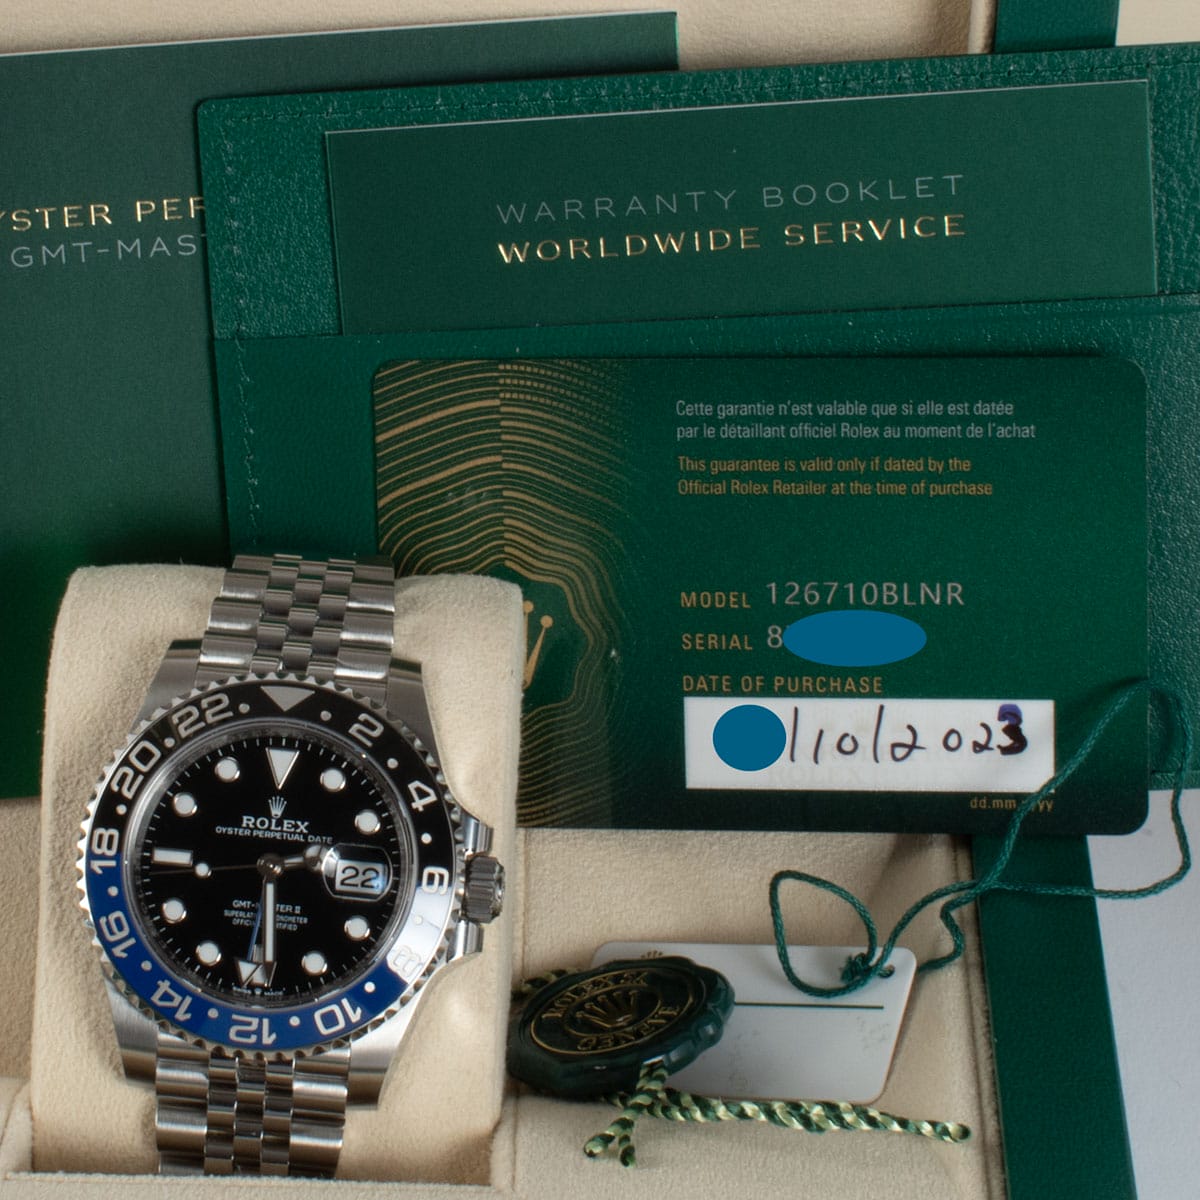 View in Box of GMT-Master II 'Batgirl'